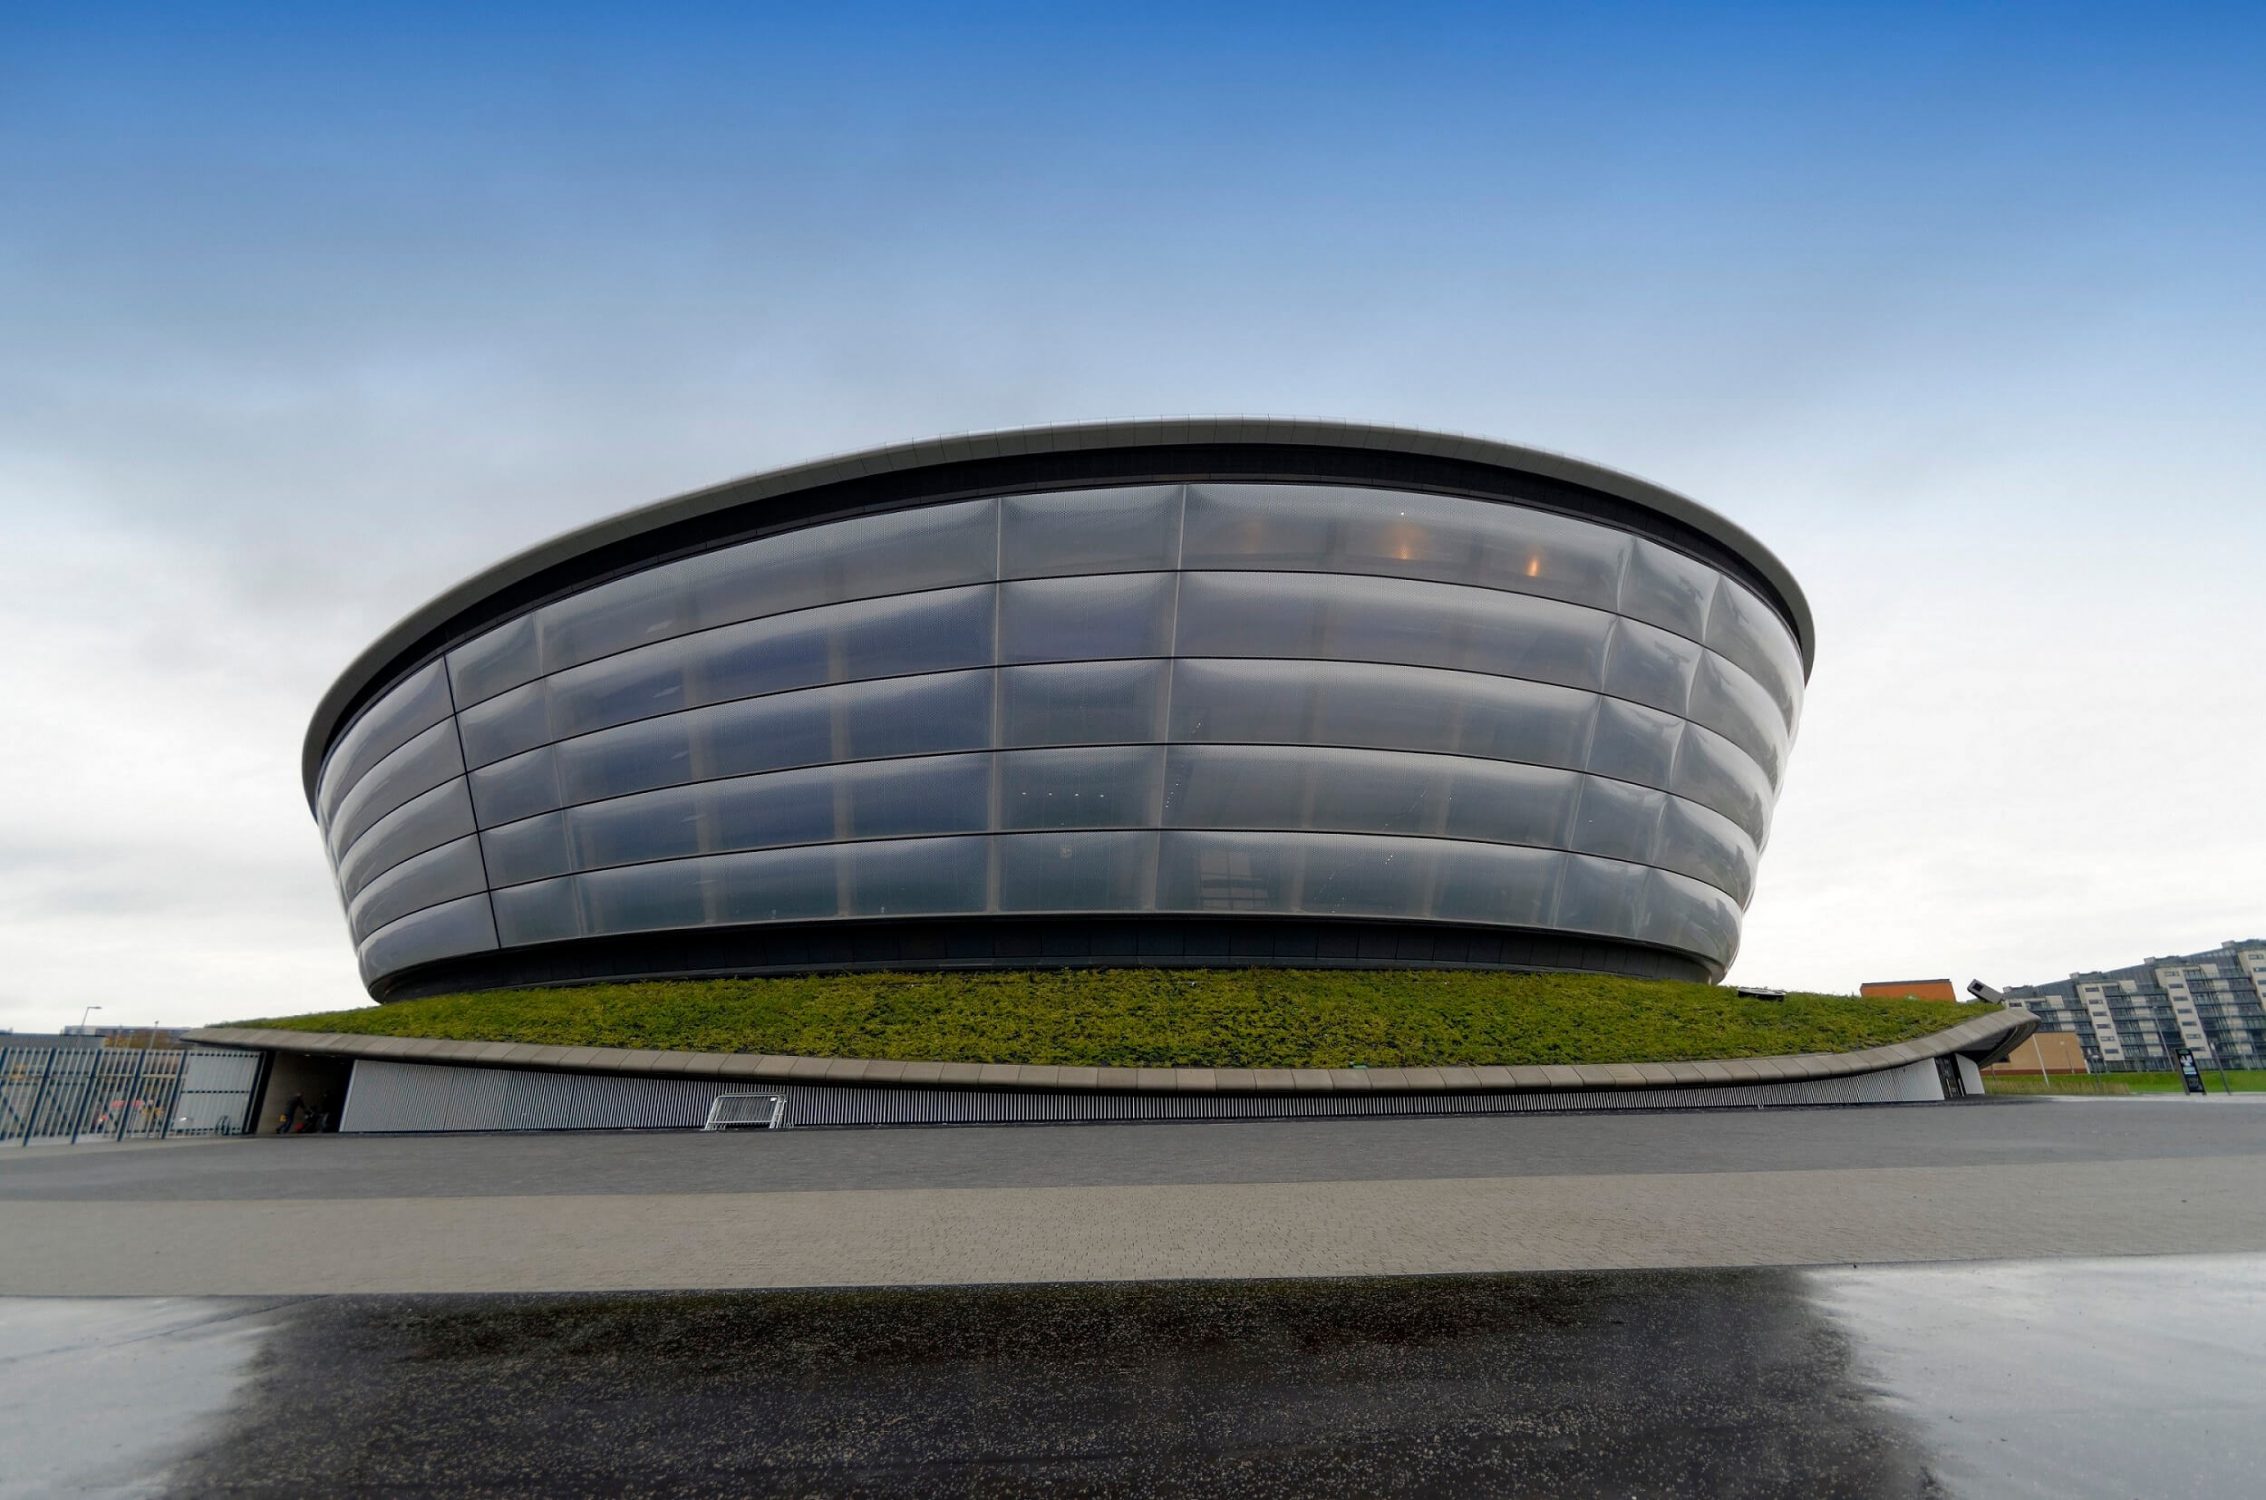 The SSE Hydro 2